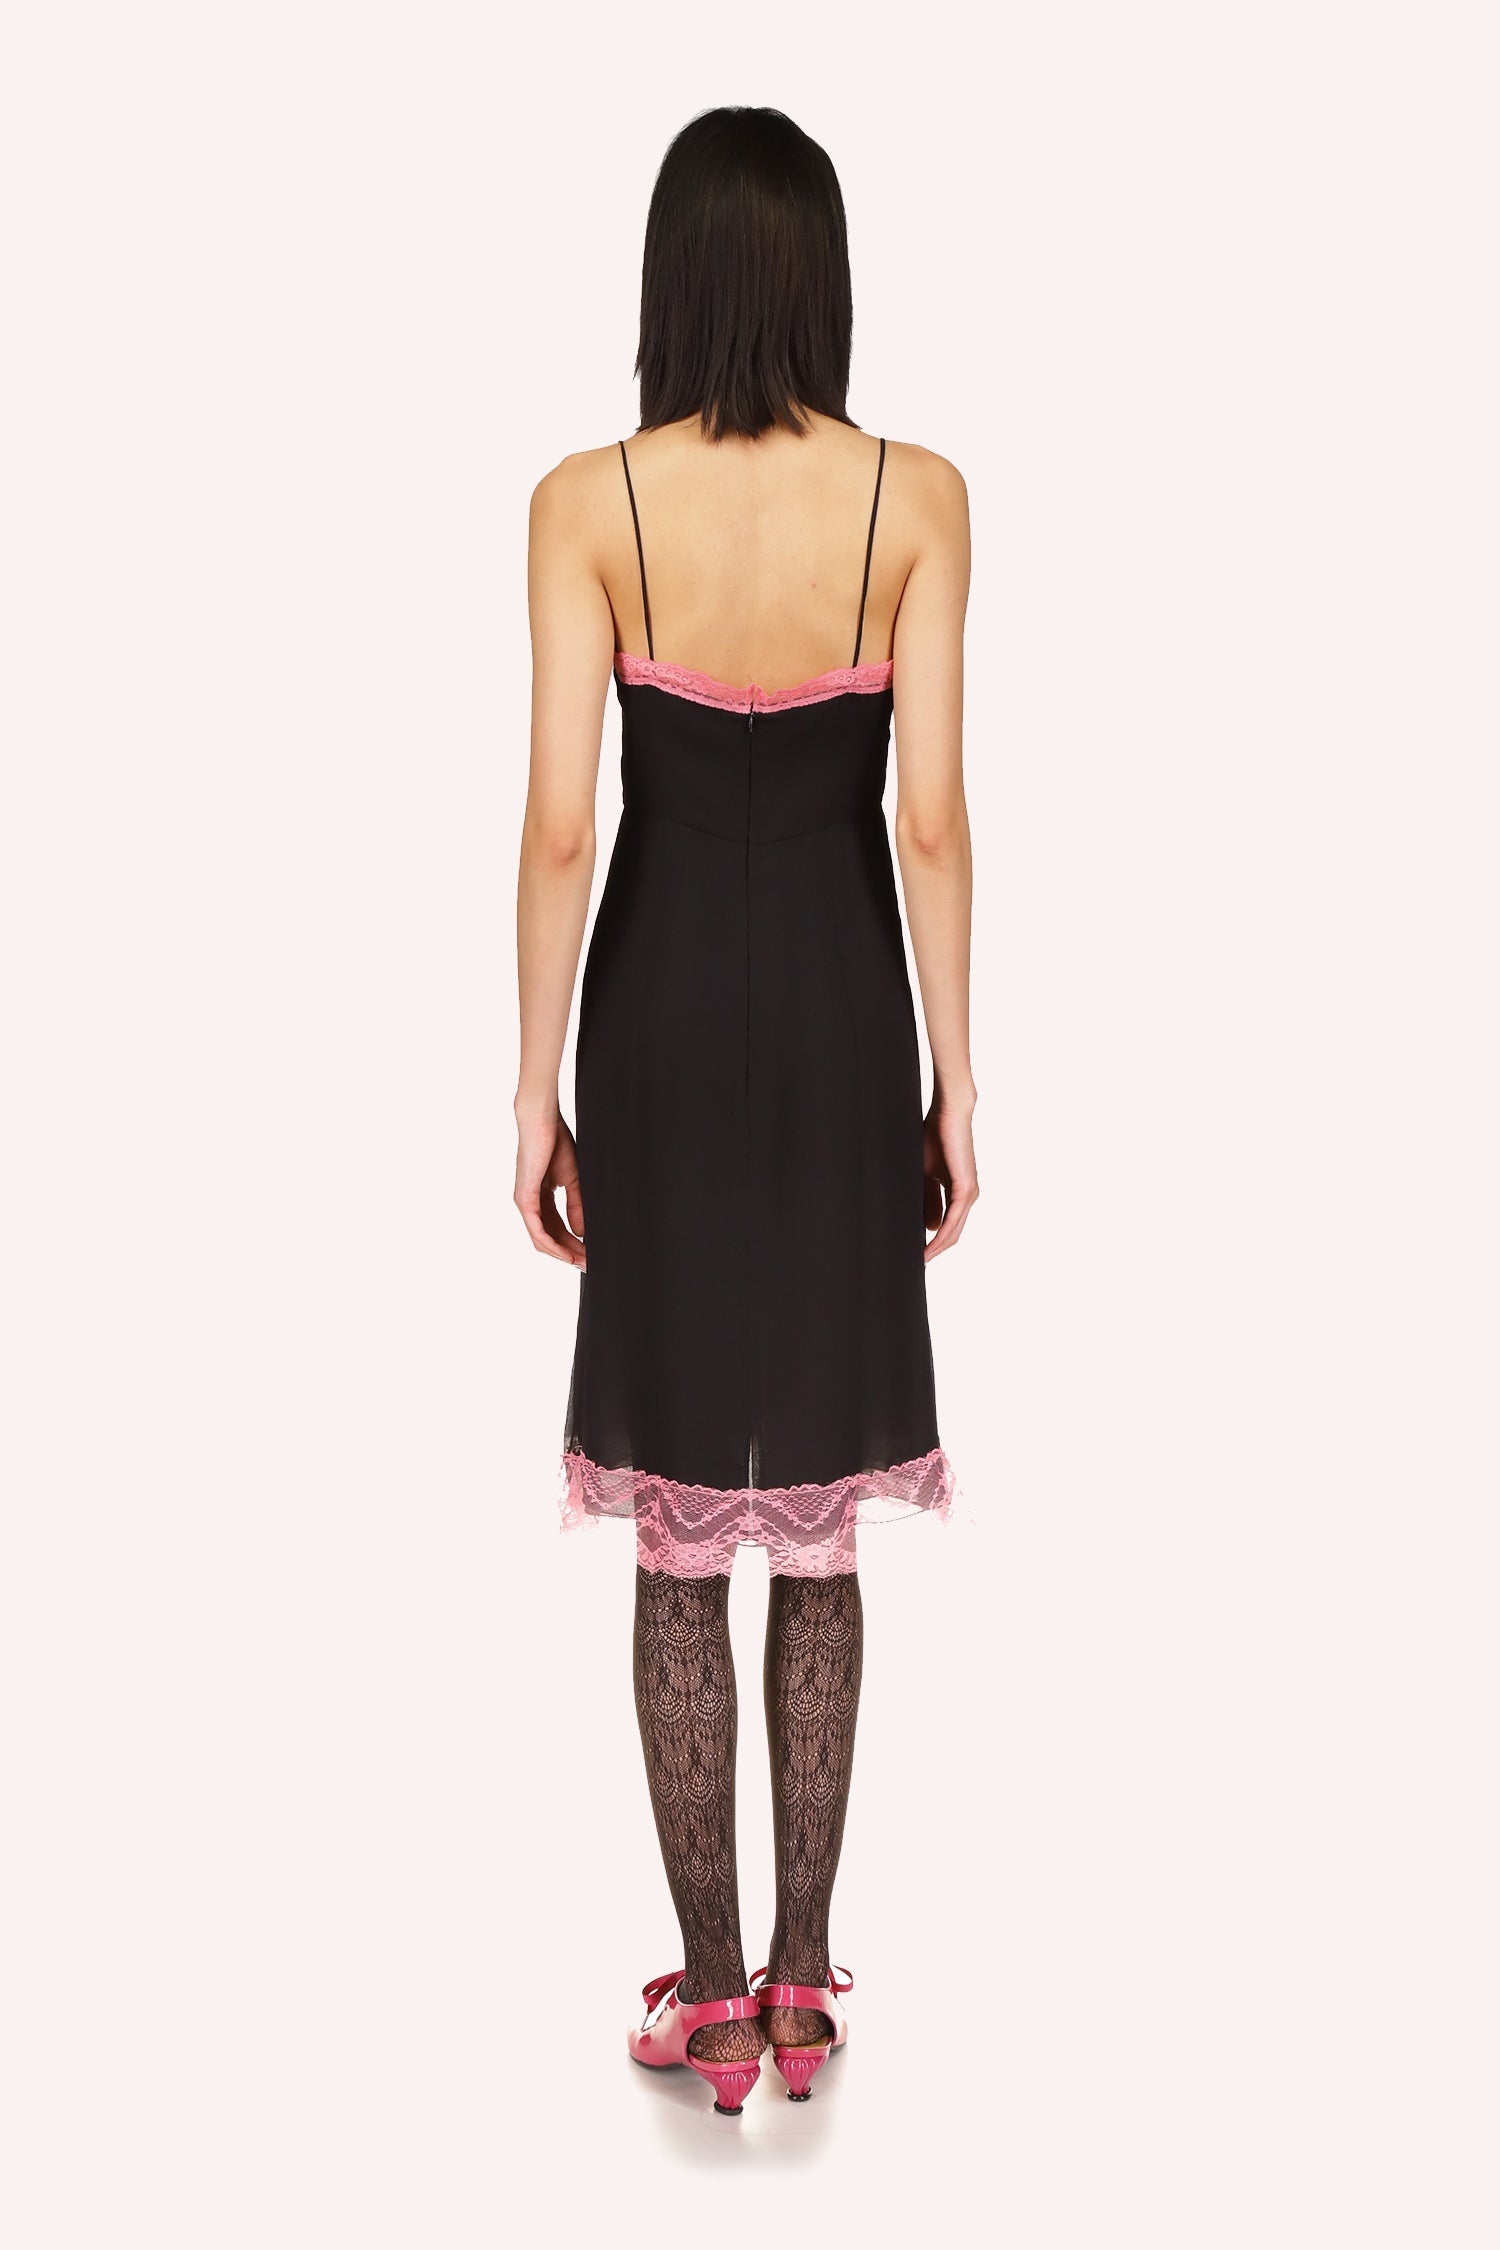 Lingerie Chiffon Slip Dress Rose, black with rose highlight lace a top and bottom zipper on back